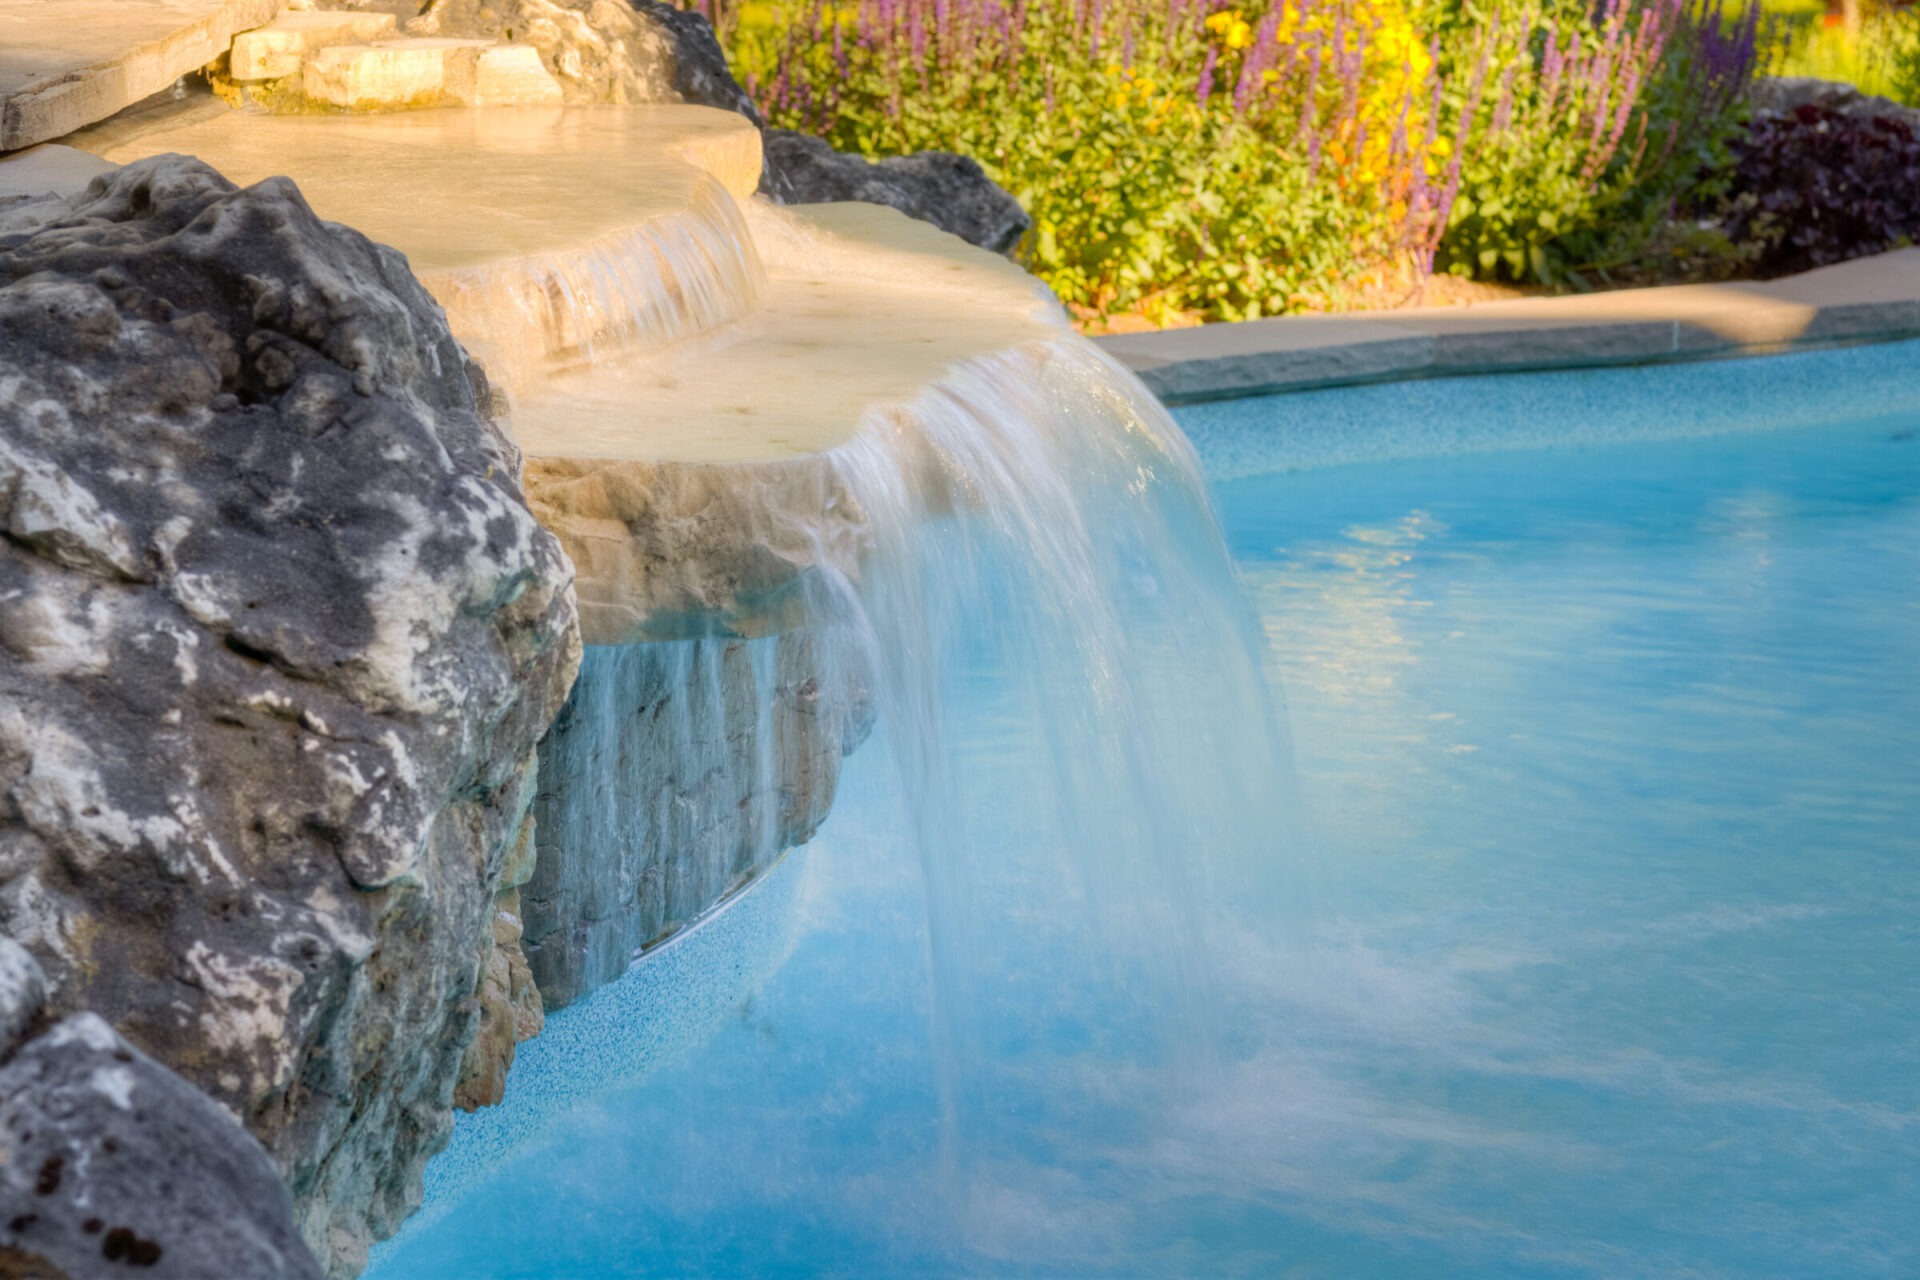 A serene artificial waterfall cascading into a clear blue swimming pool, surrounded by landscaping with vibrant flowering plants under a bright sky.